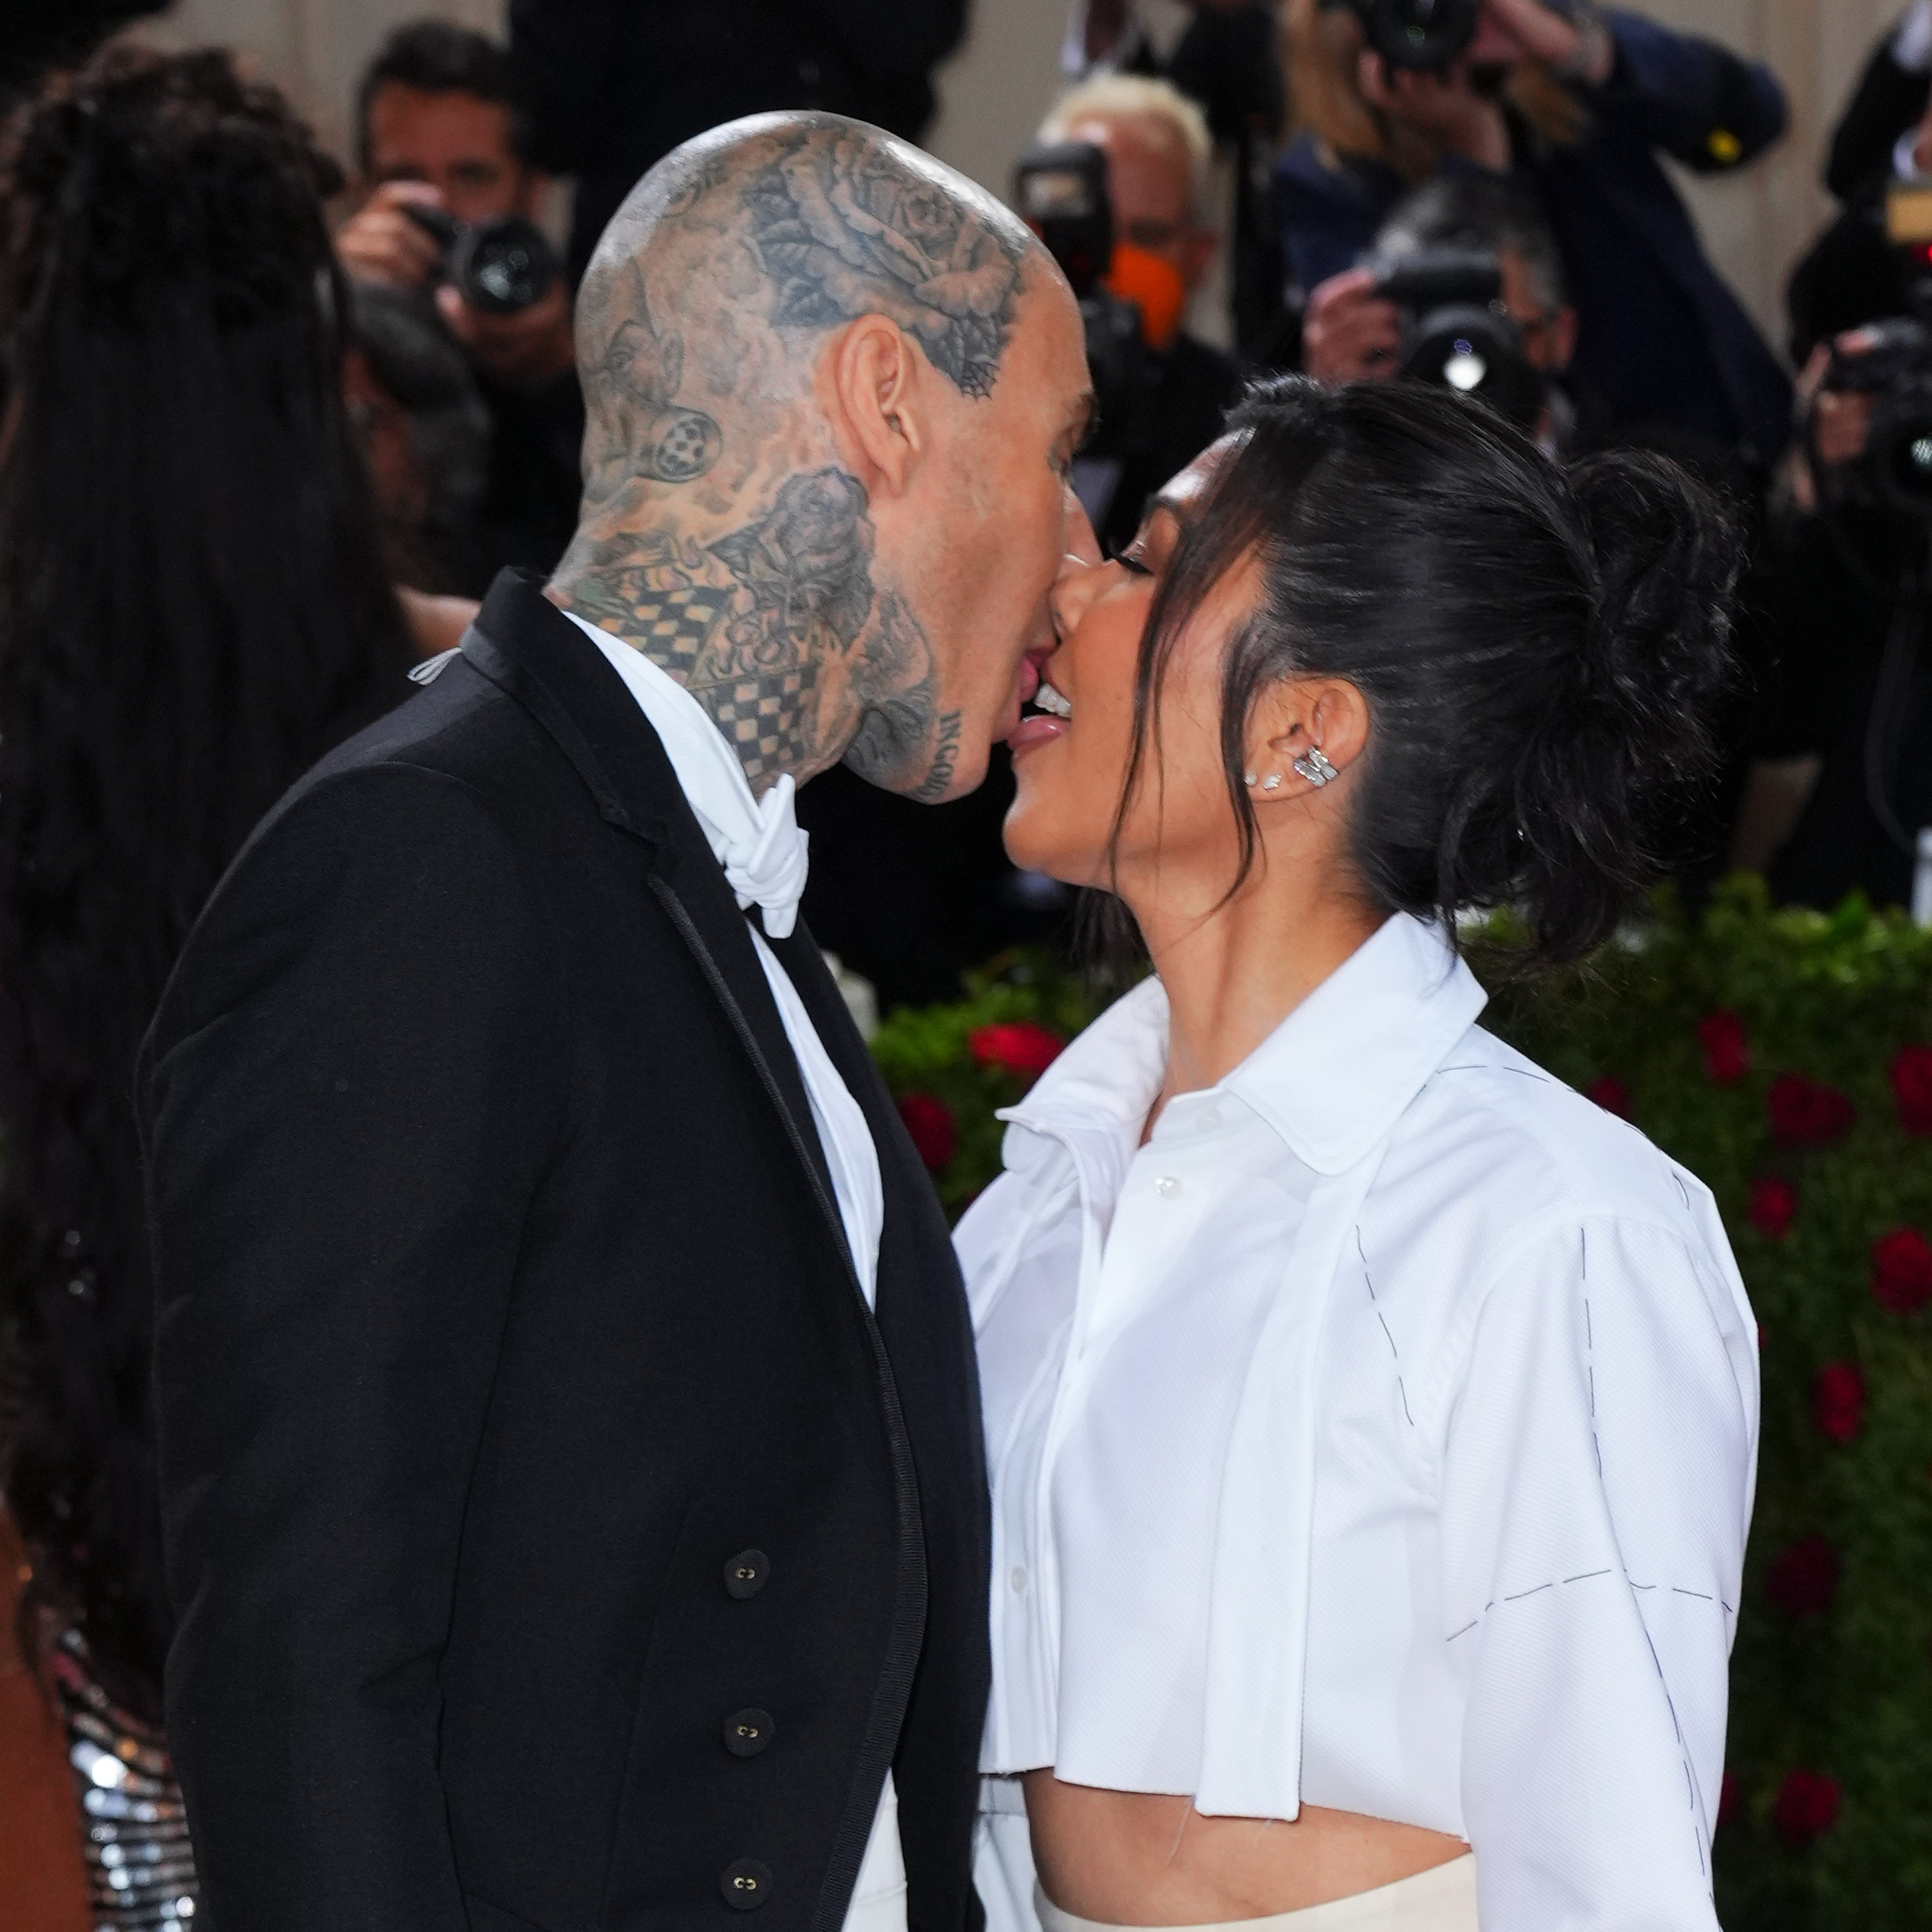 Travis Barker and Kourtney Kardashian at The 2022 Met Gala Celebrating "In America: An Anthology of Fashion" at The Metropolitan Museum of Art on May 2, 2022, in New York City. | Source: Getty Images